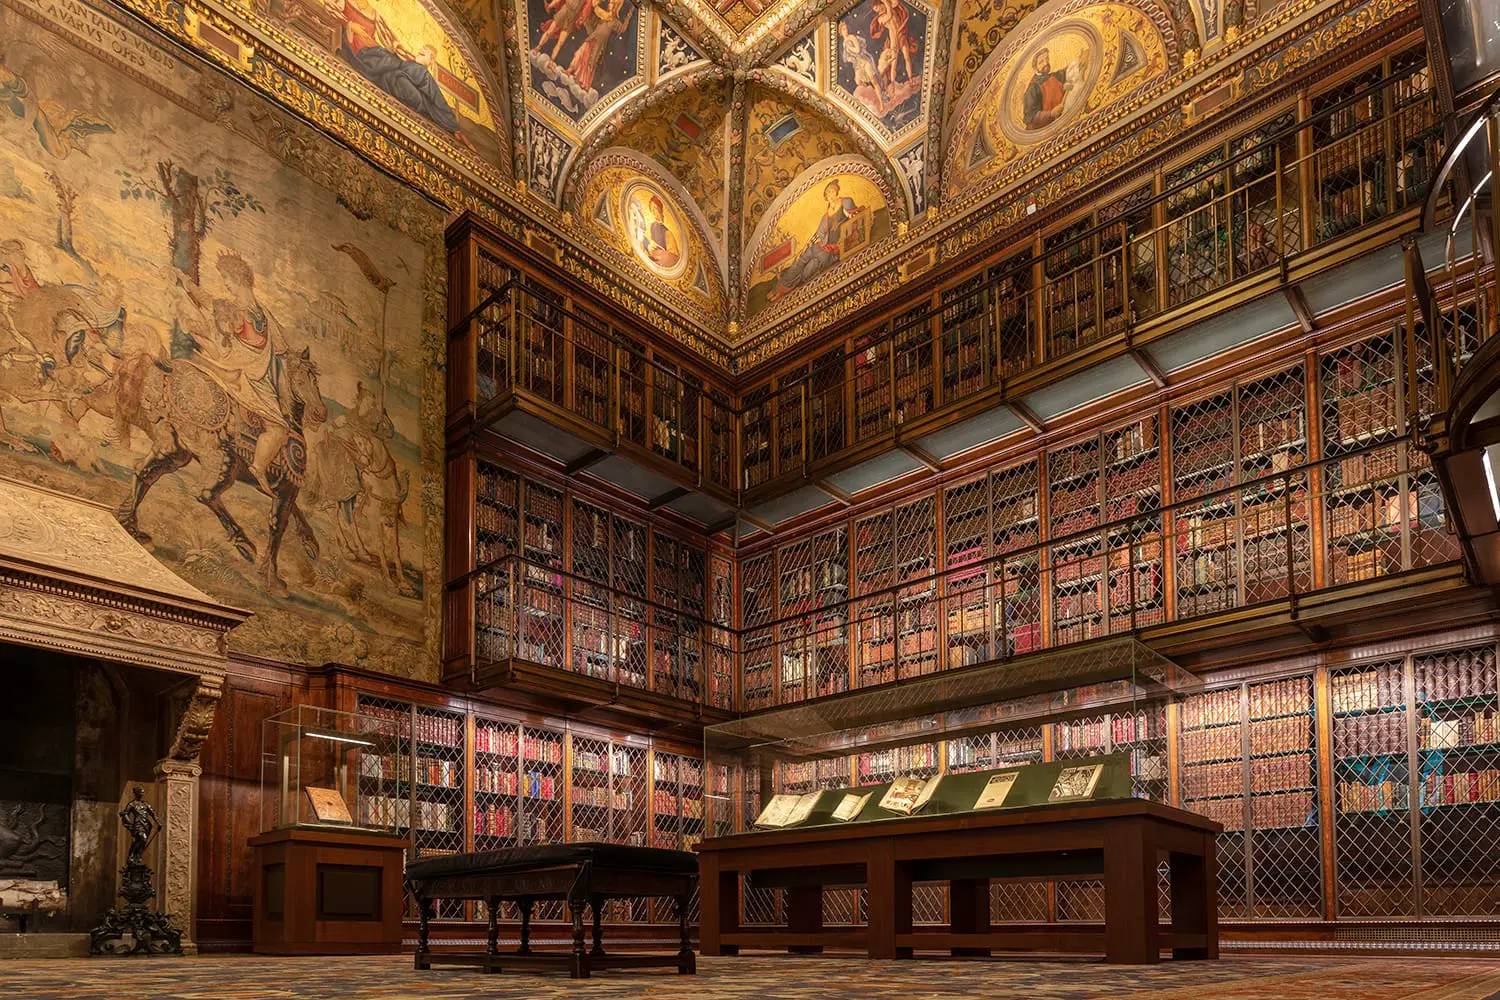 Inside the Pierpont Morgan library in New York City, USA